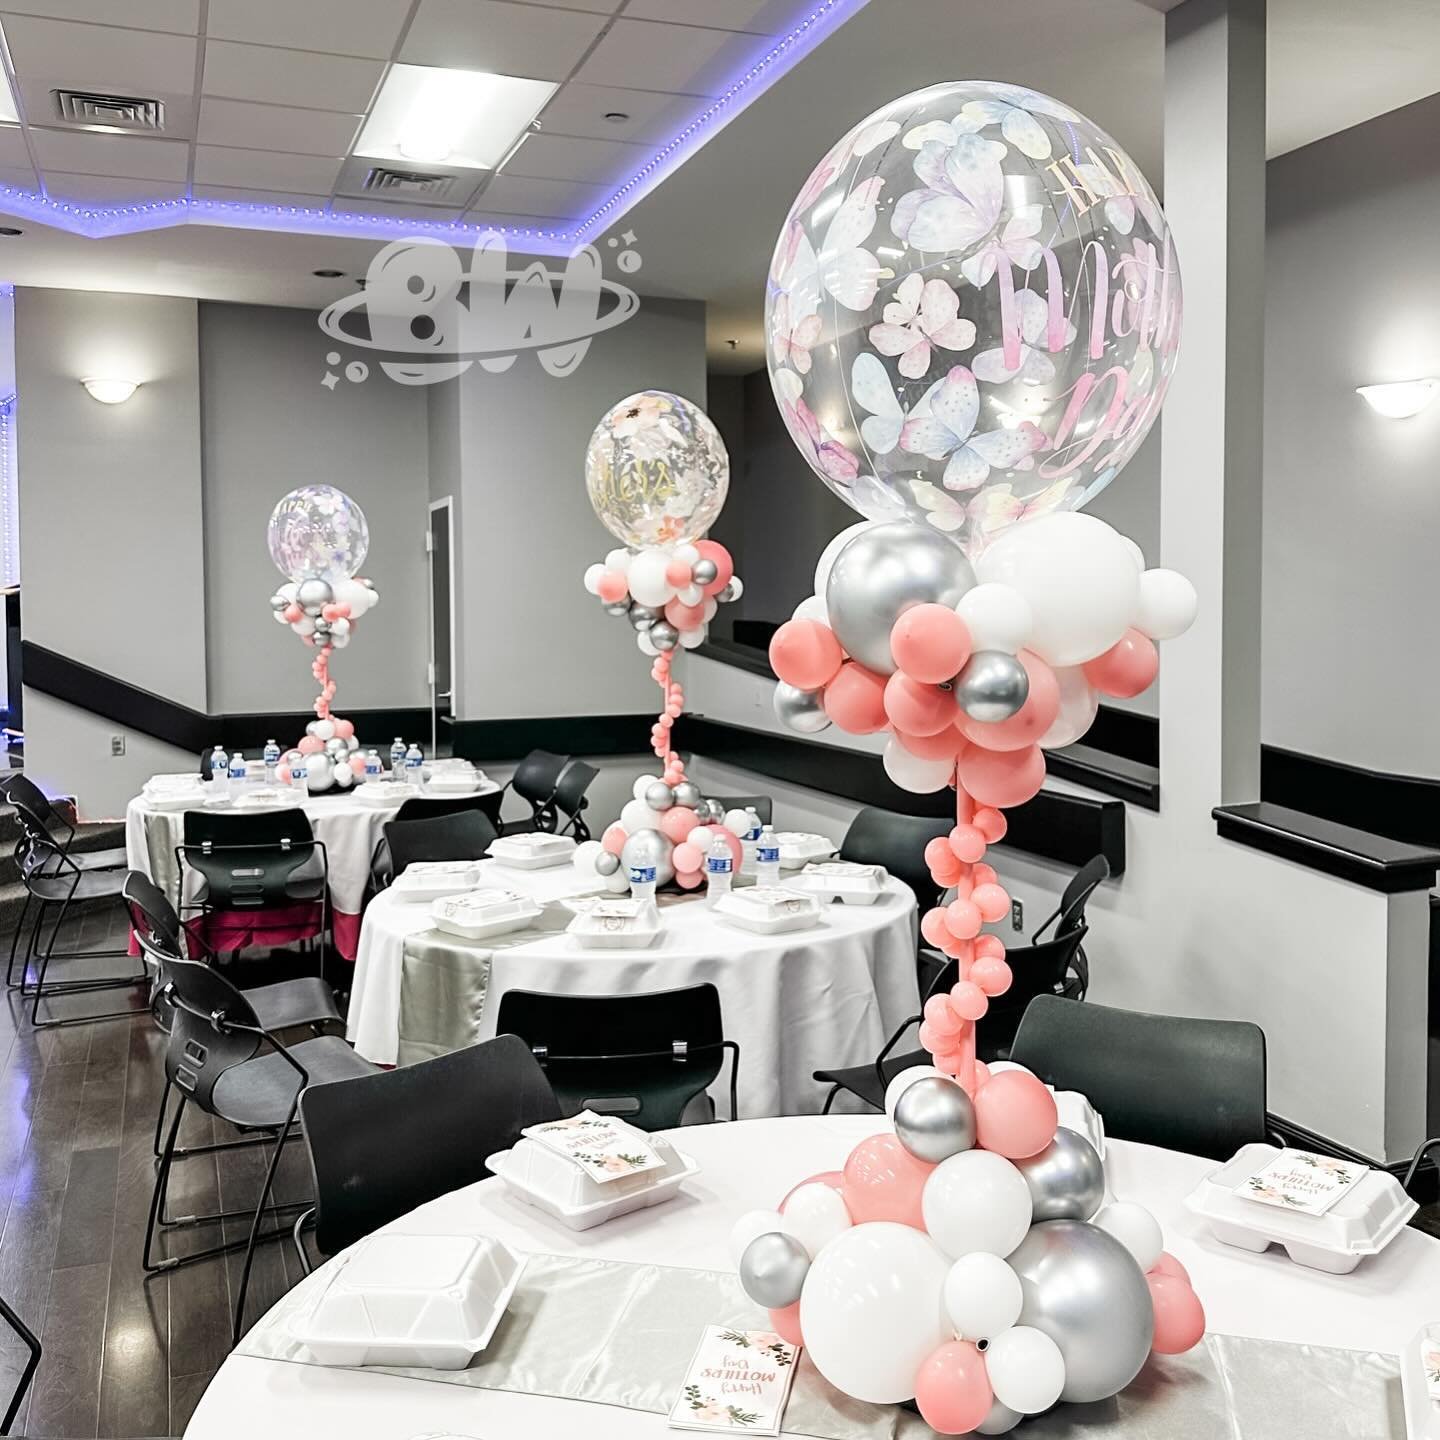 Mother&rsquo;s day is everyday! Grateful for all the mommas! 
.
.
#ballooncenterpieces #miamiballoons #momballoons #mothersday